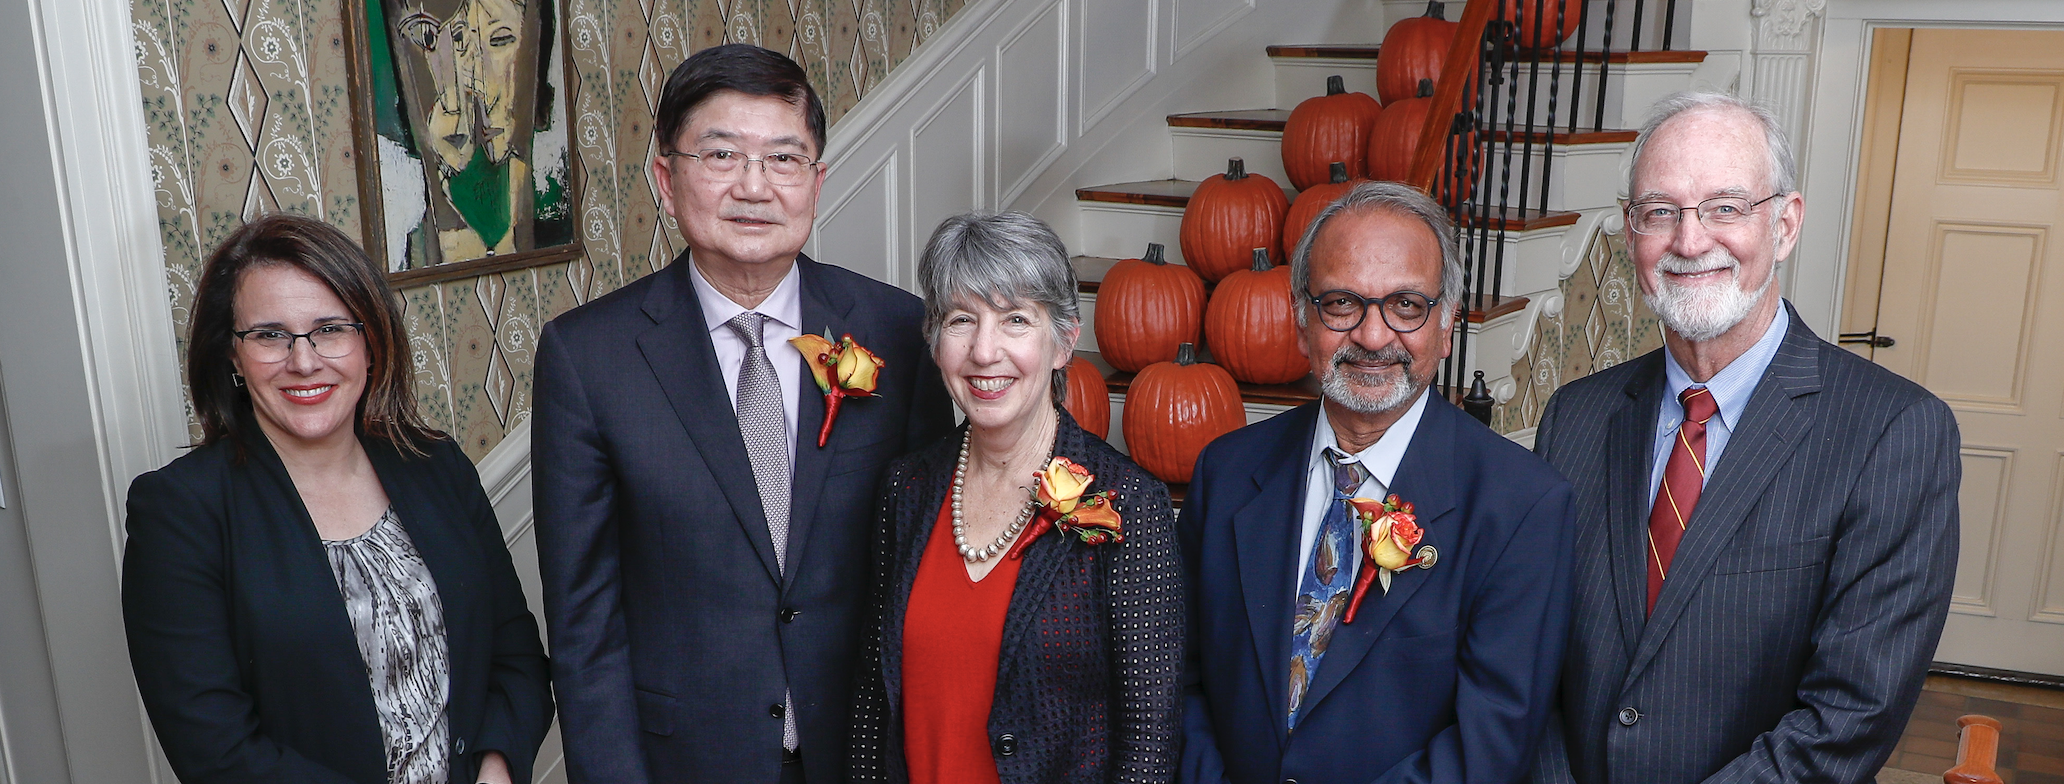 2019 Regents Professors Ned Mohan, David Y.H. Pui, and Marelene Zuk with President Joan T.A. Gabel and Regent Kendall Powell